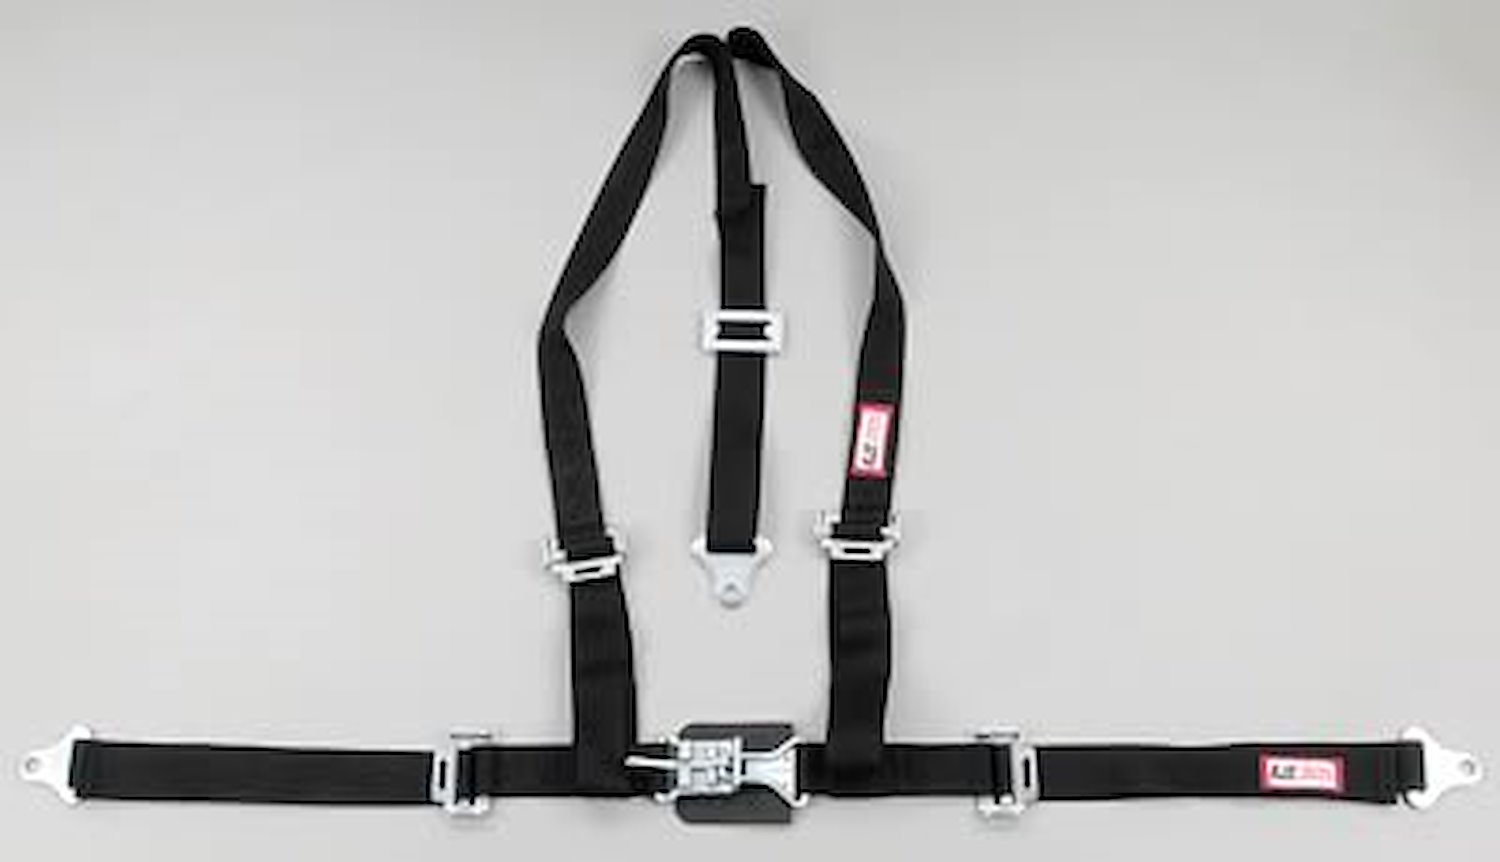 NON-SFI L&L HARNESS 3 PULL UP Lap Belt SEWN IN 2 Shoulder Harness V ROLL BAR Mount ALL SNAP ENDS HOT PINK